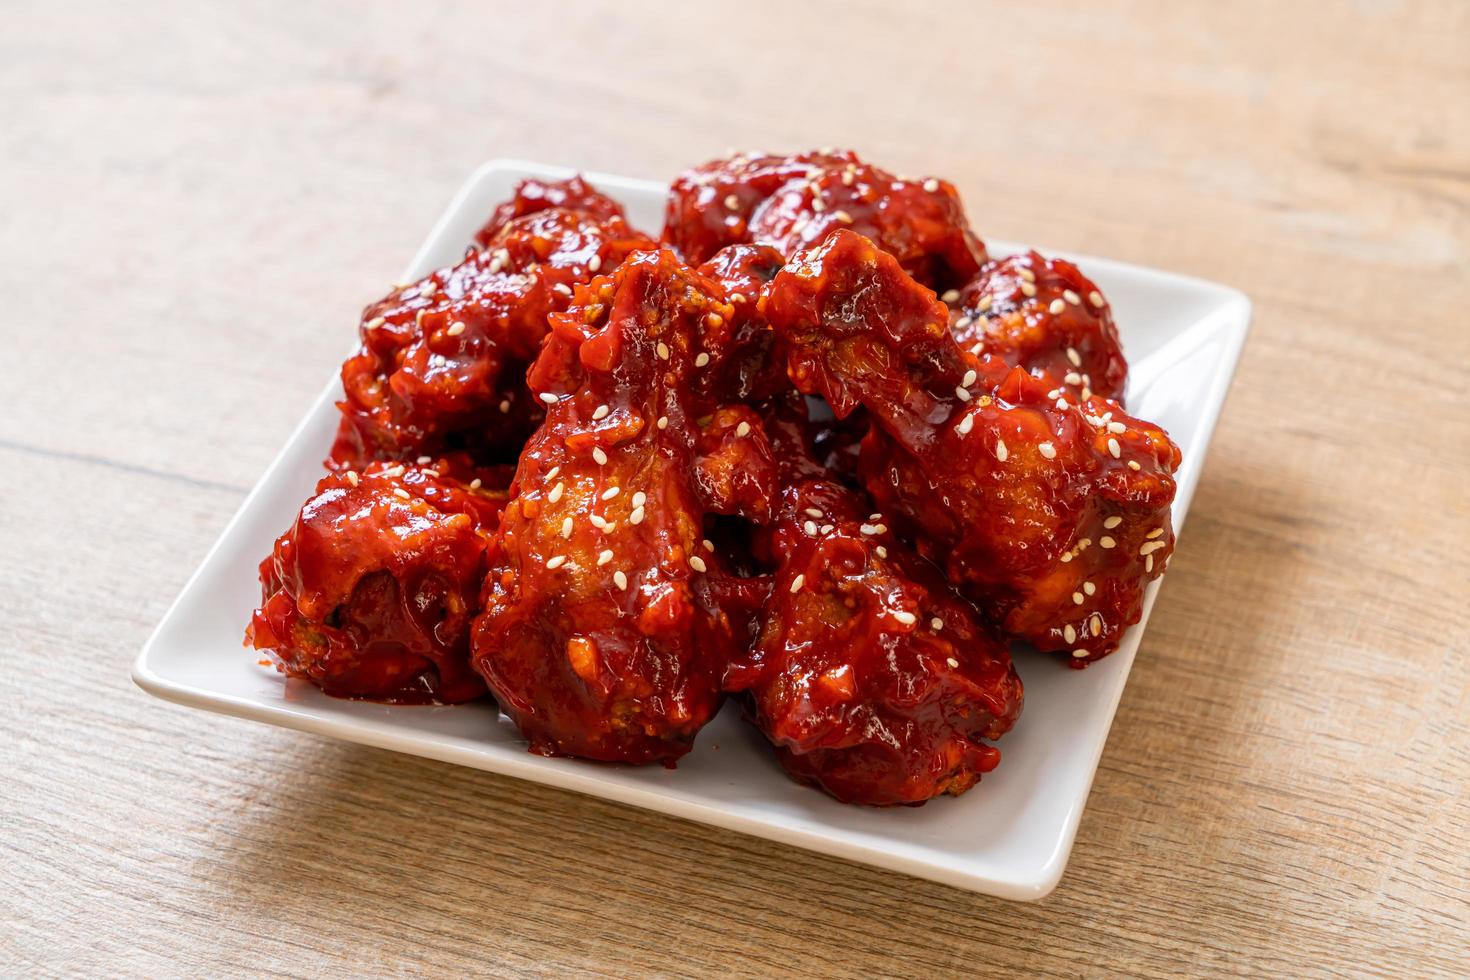 Fried chicken with spicy sauce in Korean style photo